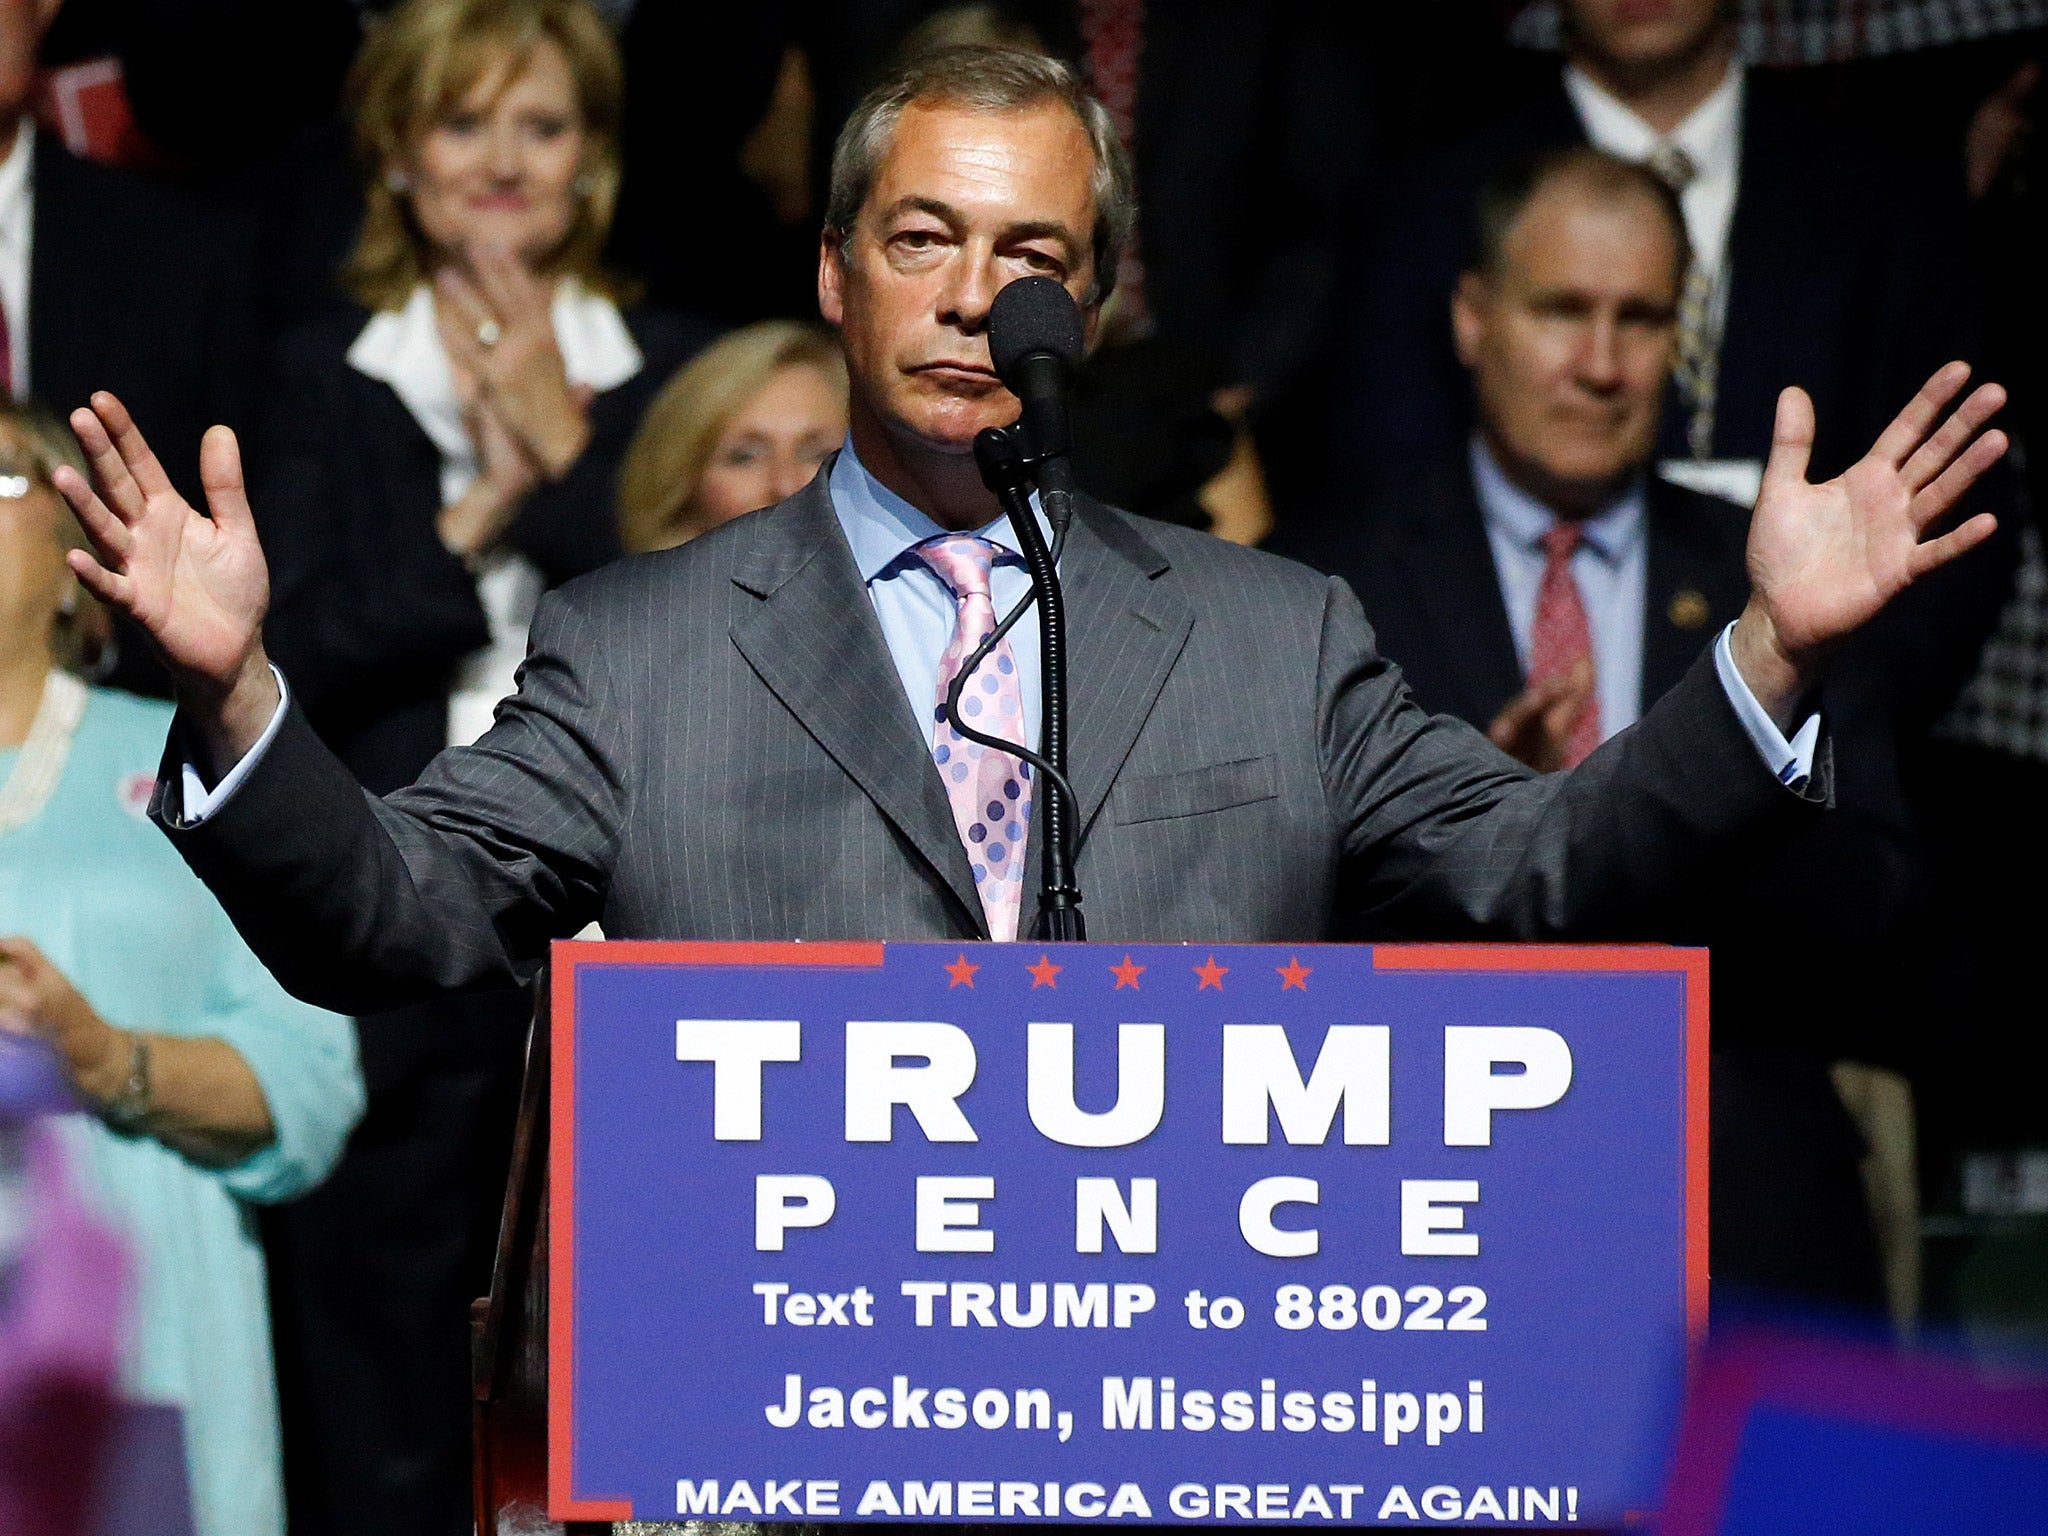 Nigel Farage, ex-UKIP leader joined Donald Trump at a rally in Jackson, Mississippi